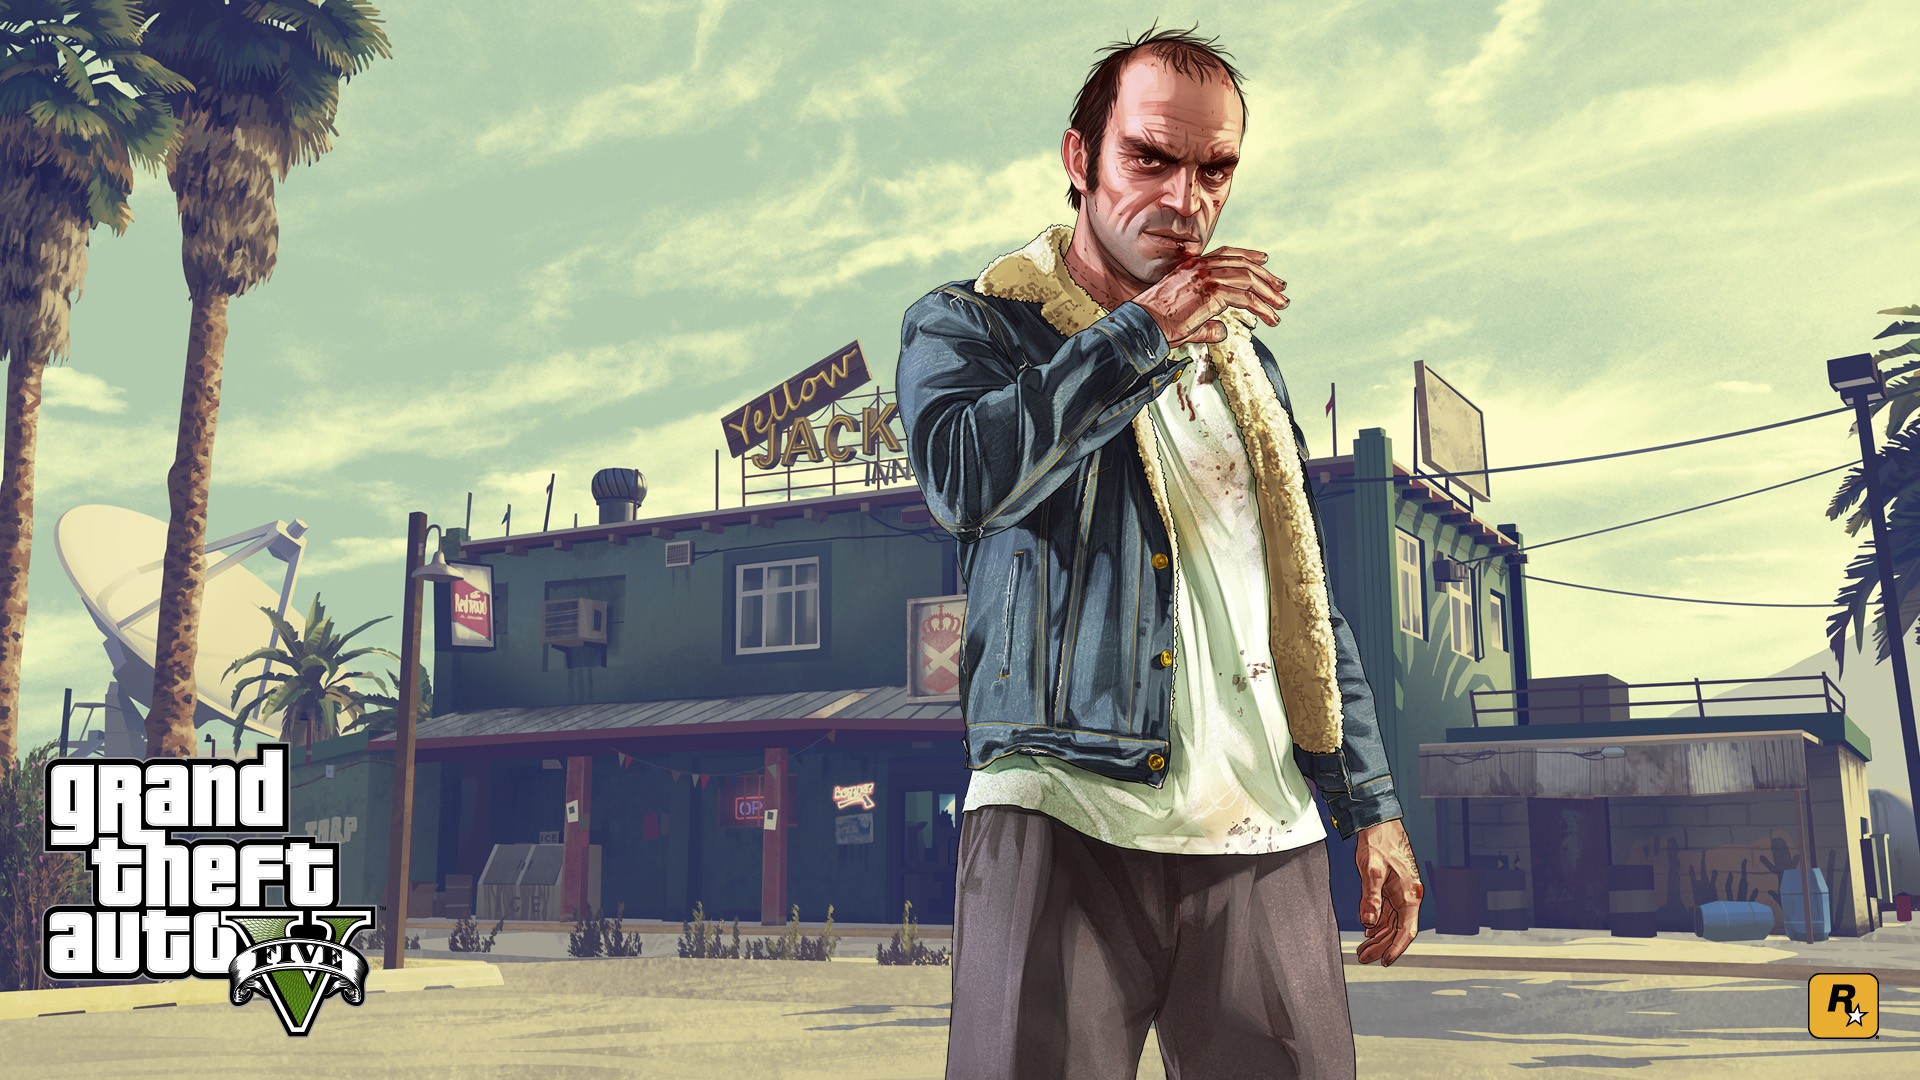 General 1920x1080 Trevor Philips Grand Theft Auto V Rockstar Games video games video game men PC gaming video game art